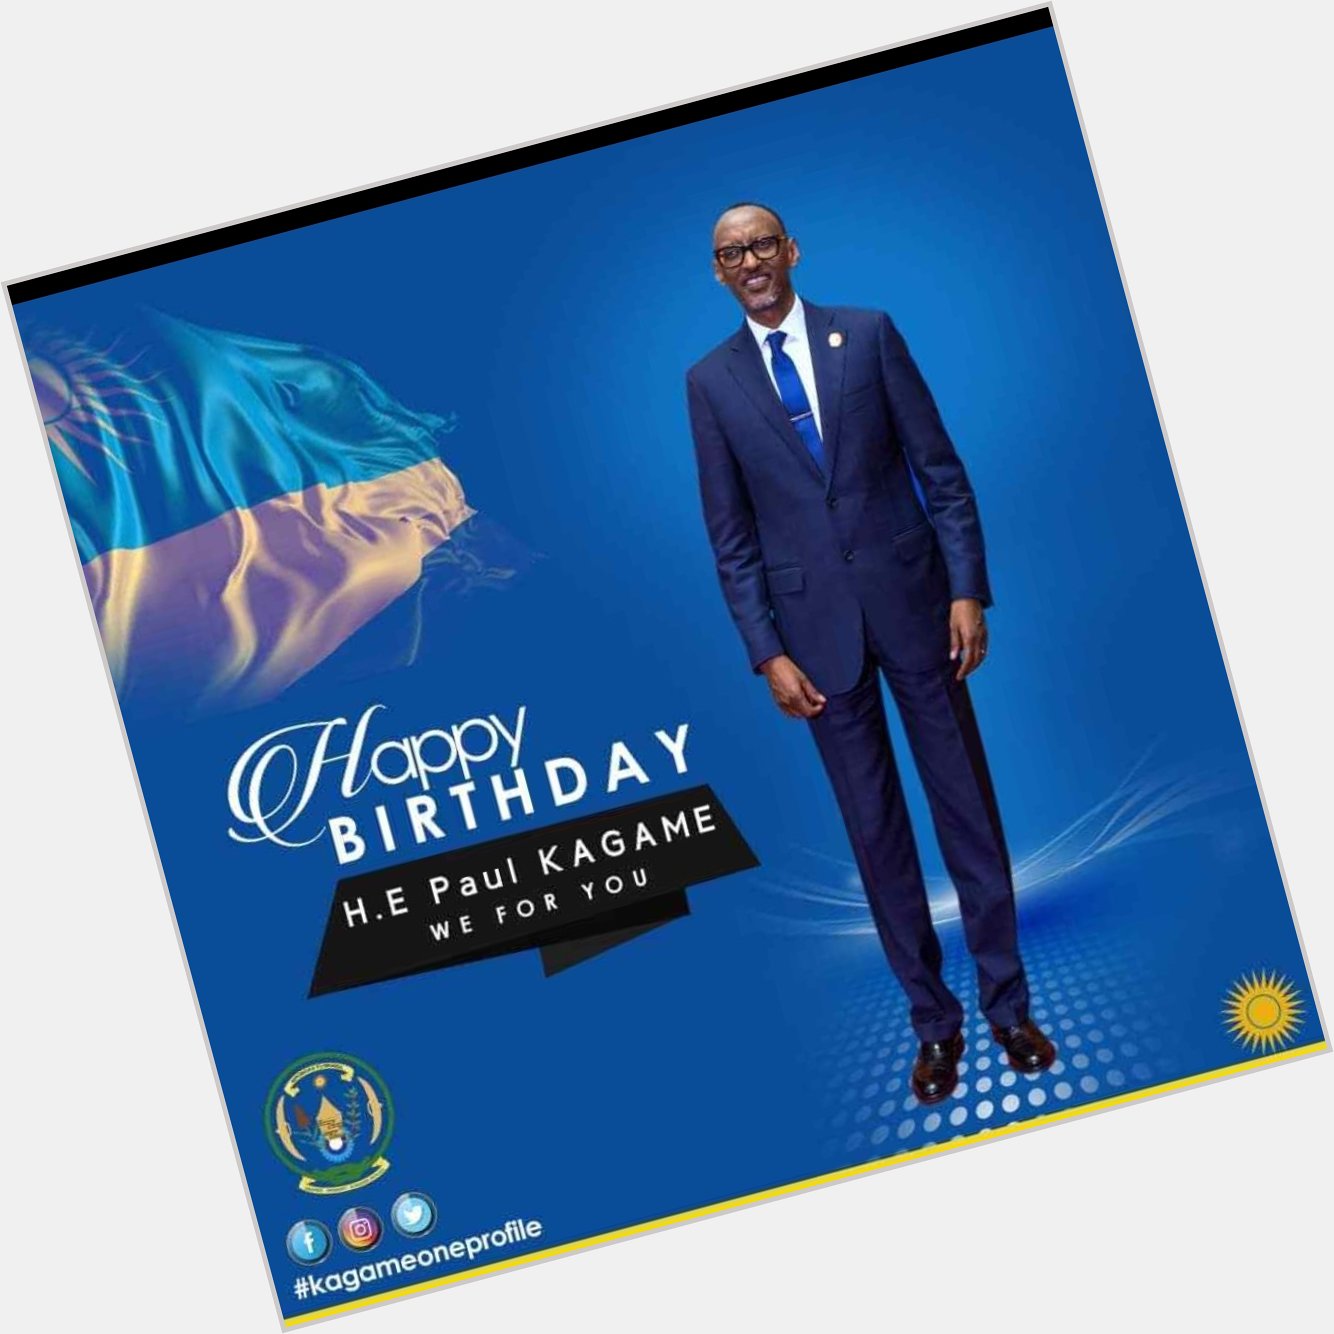 Happy birthday our lovely president 
We wish you all the best Sir KAGAME 